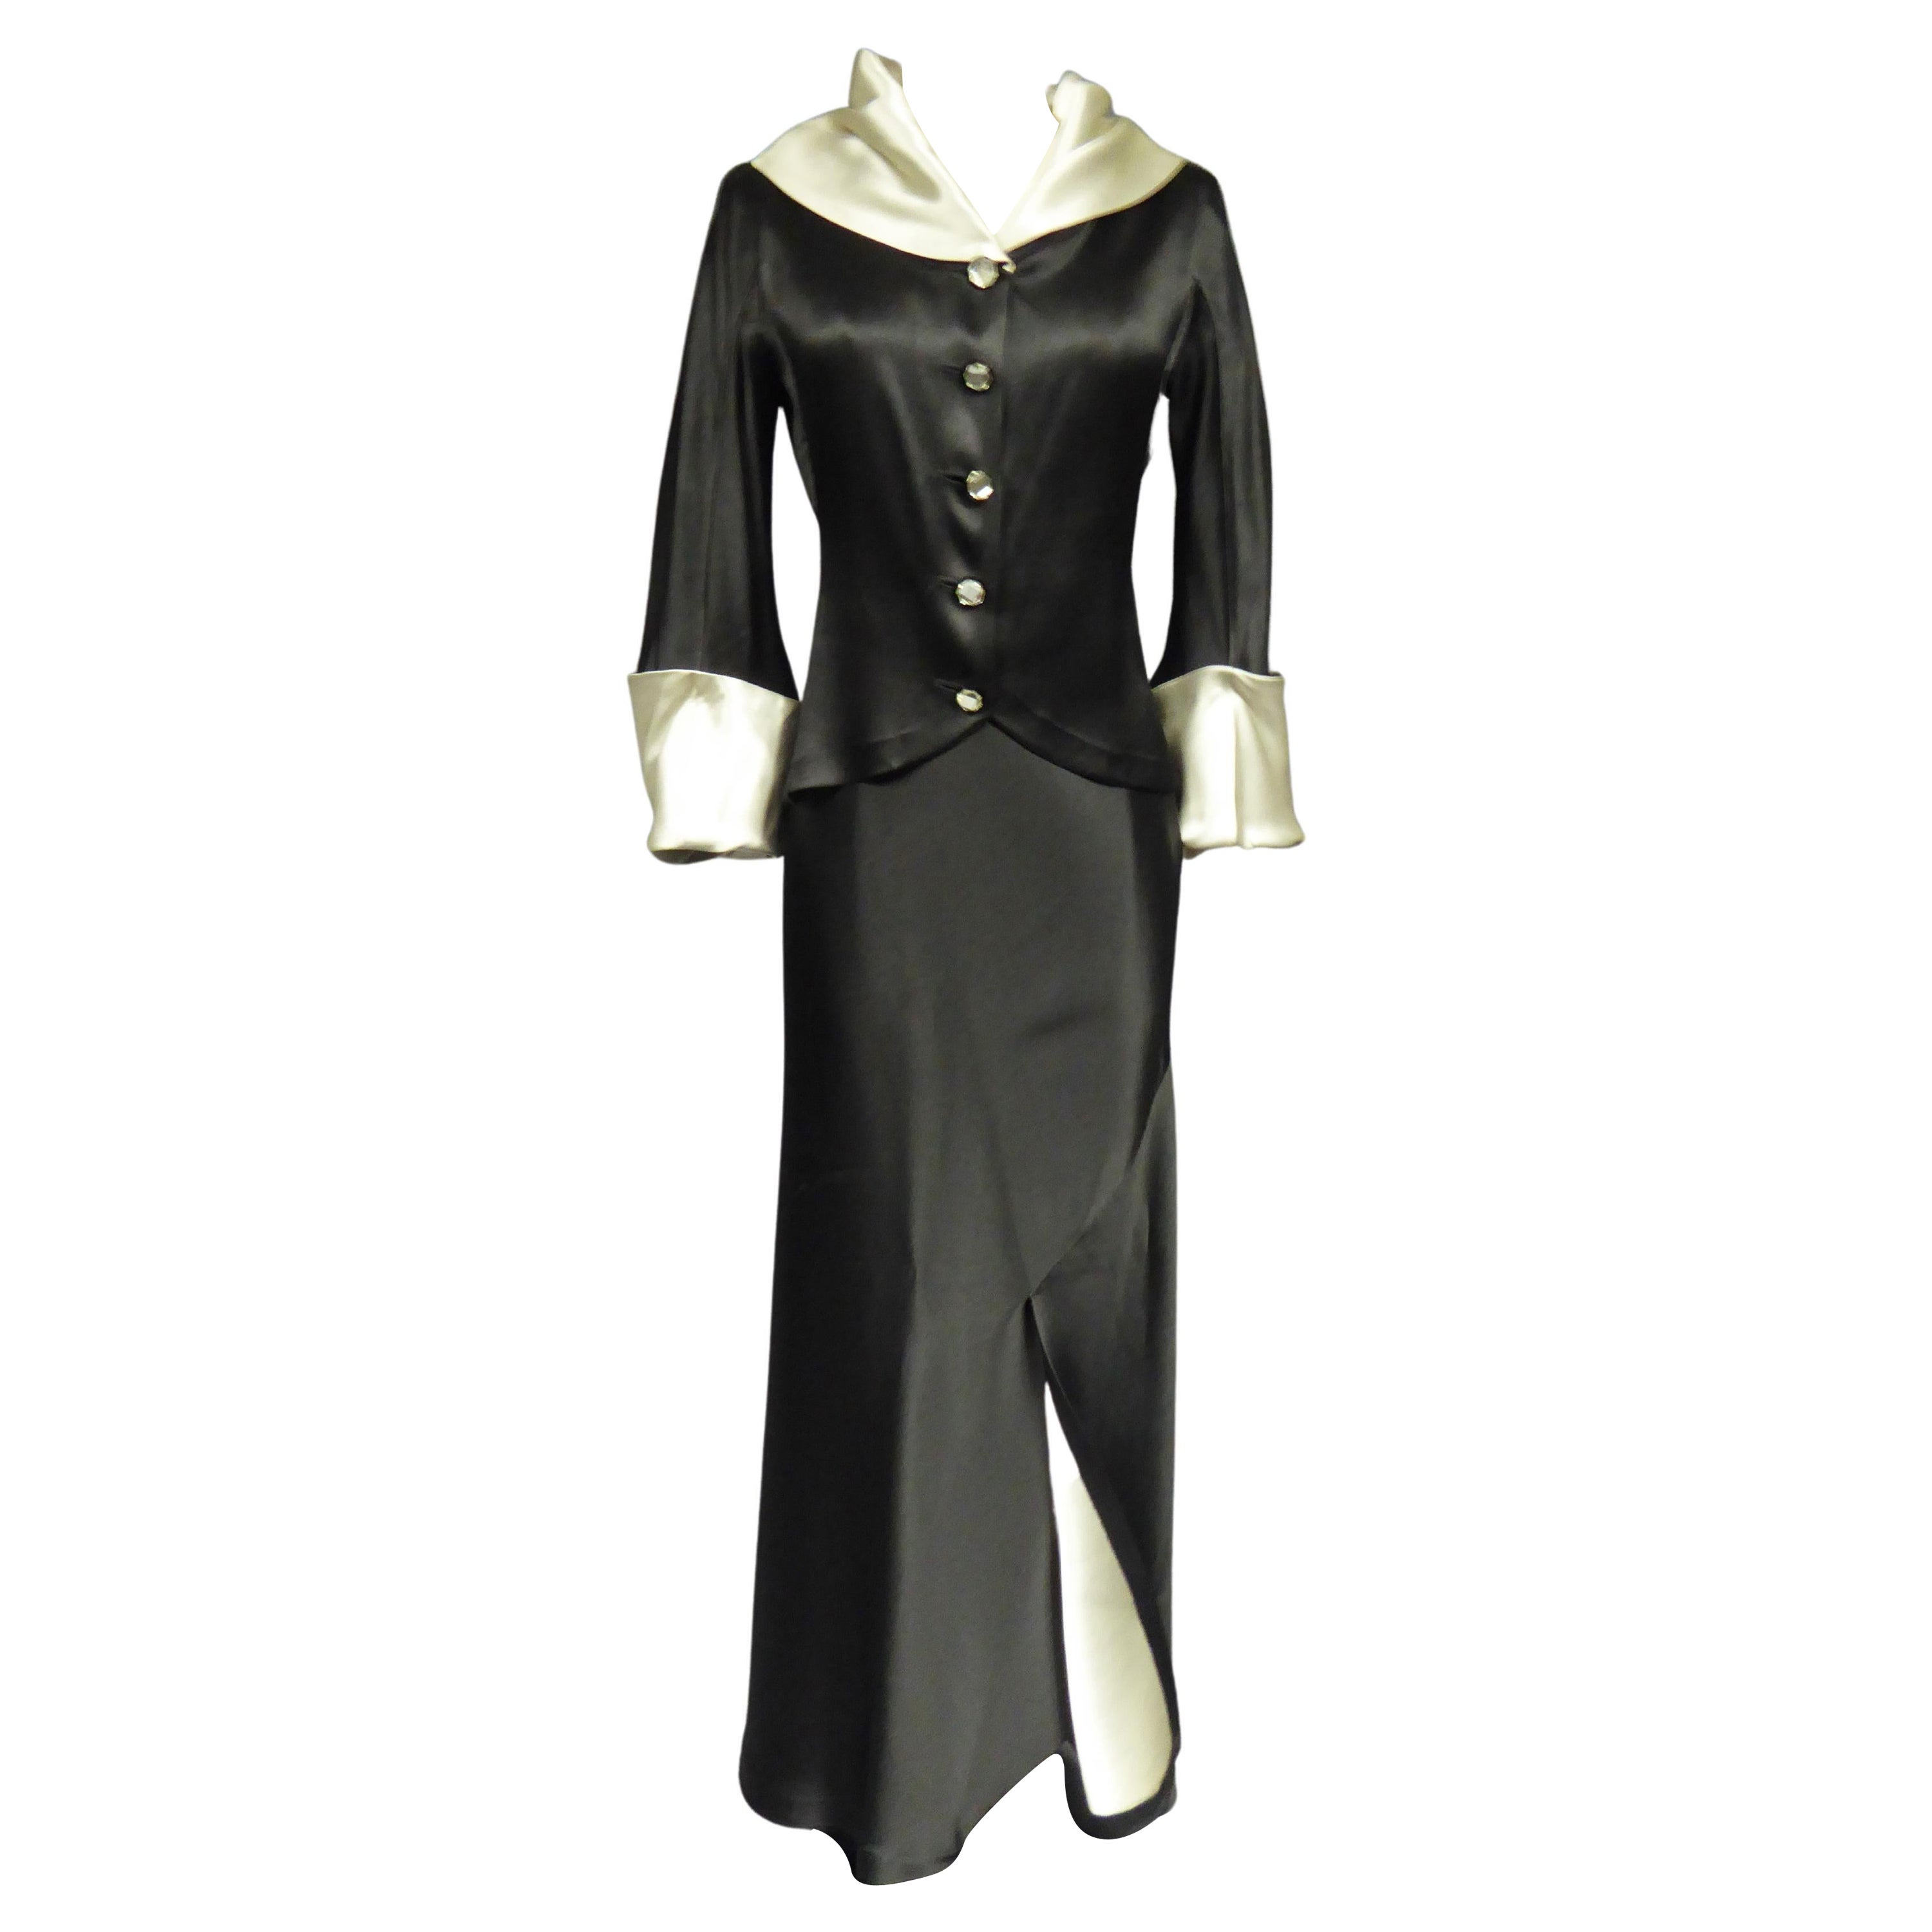 A Coco Chanel (attributed to) Tuxedo Satin Skirt Couture Suit - Paris Circa 1933 For Sale